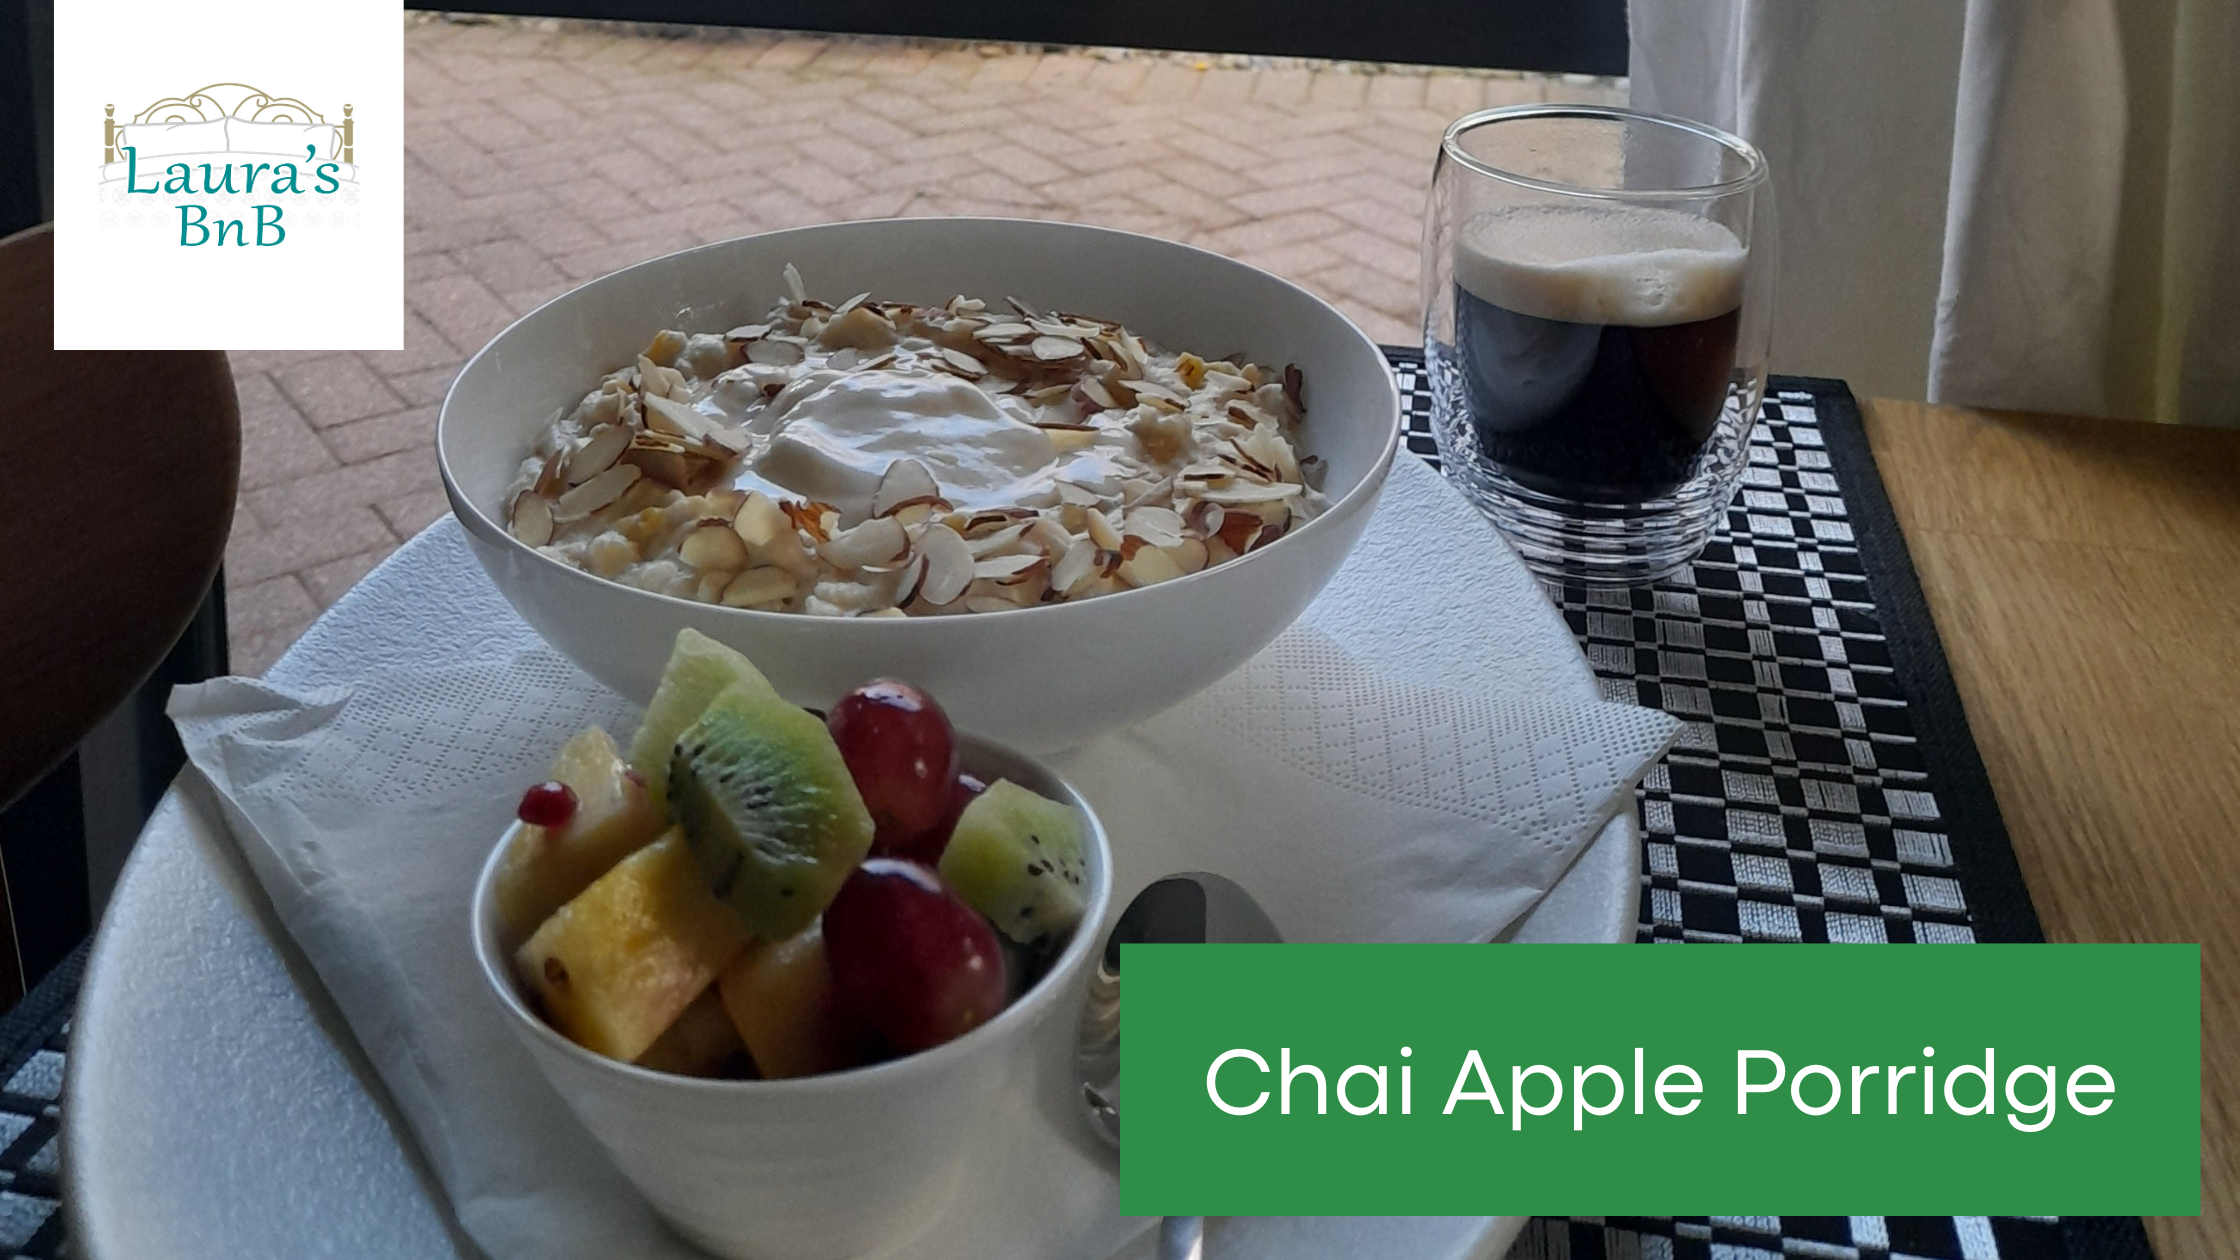 Photo of a bowl of Chai Apple Porridge with a side serving of fresh fruit salad and a cup of coffee